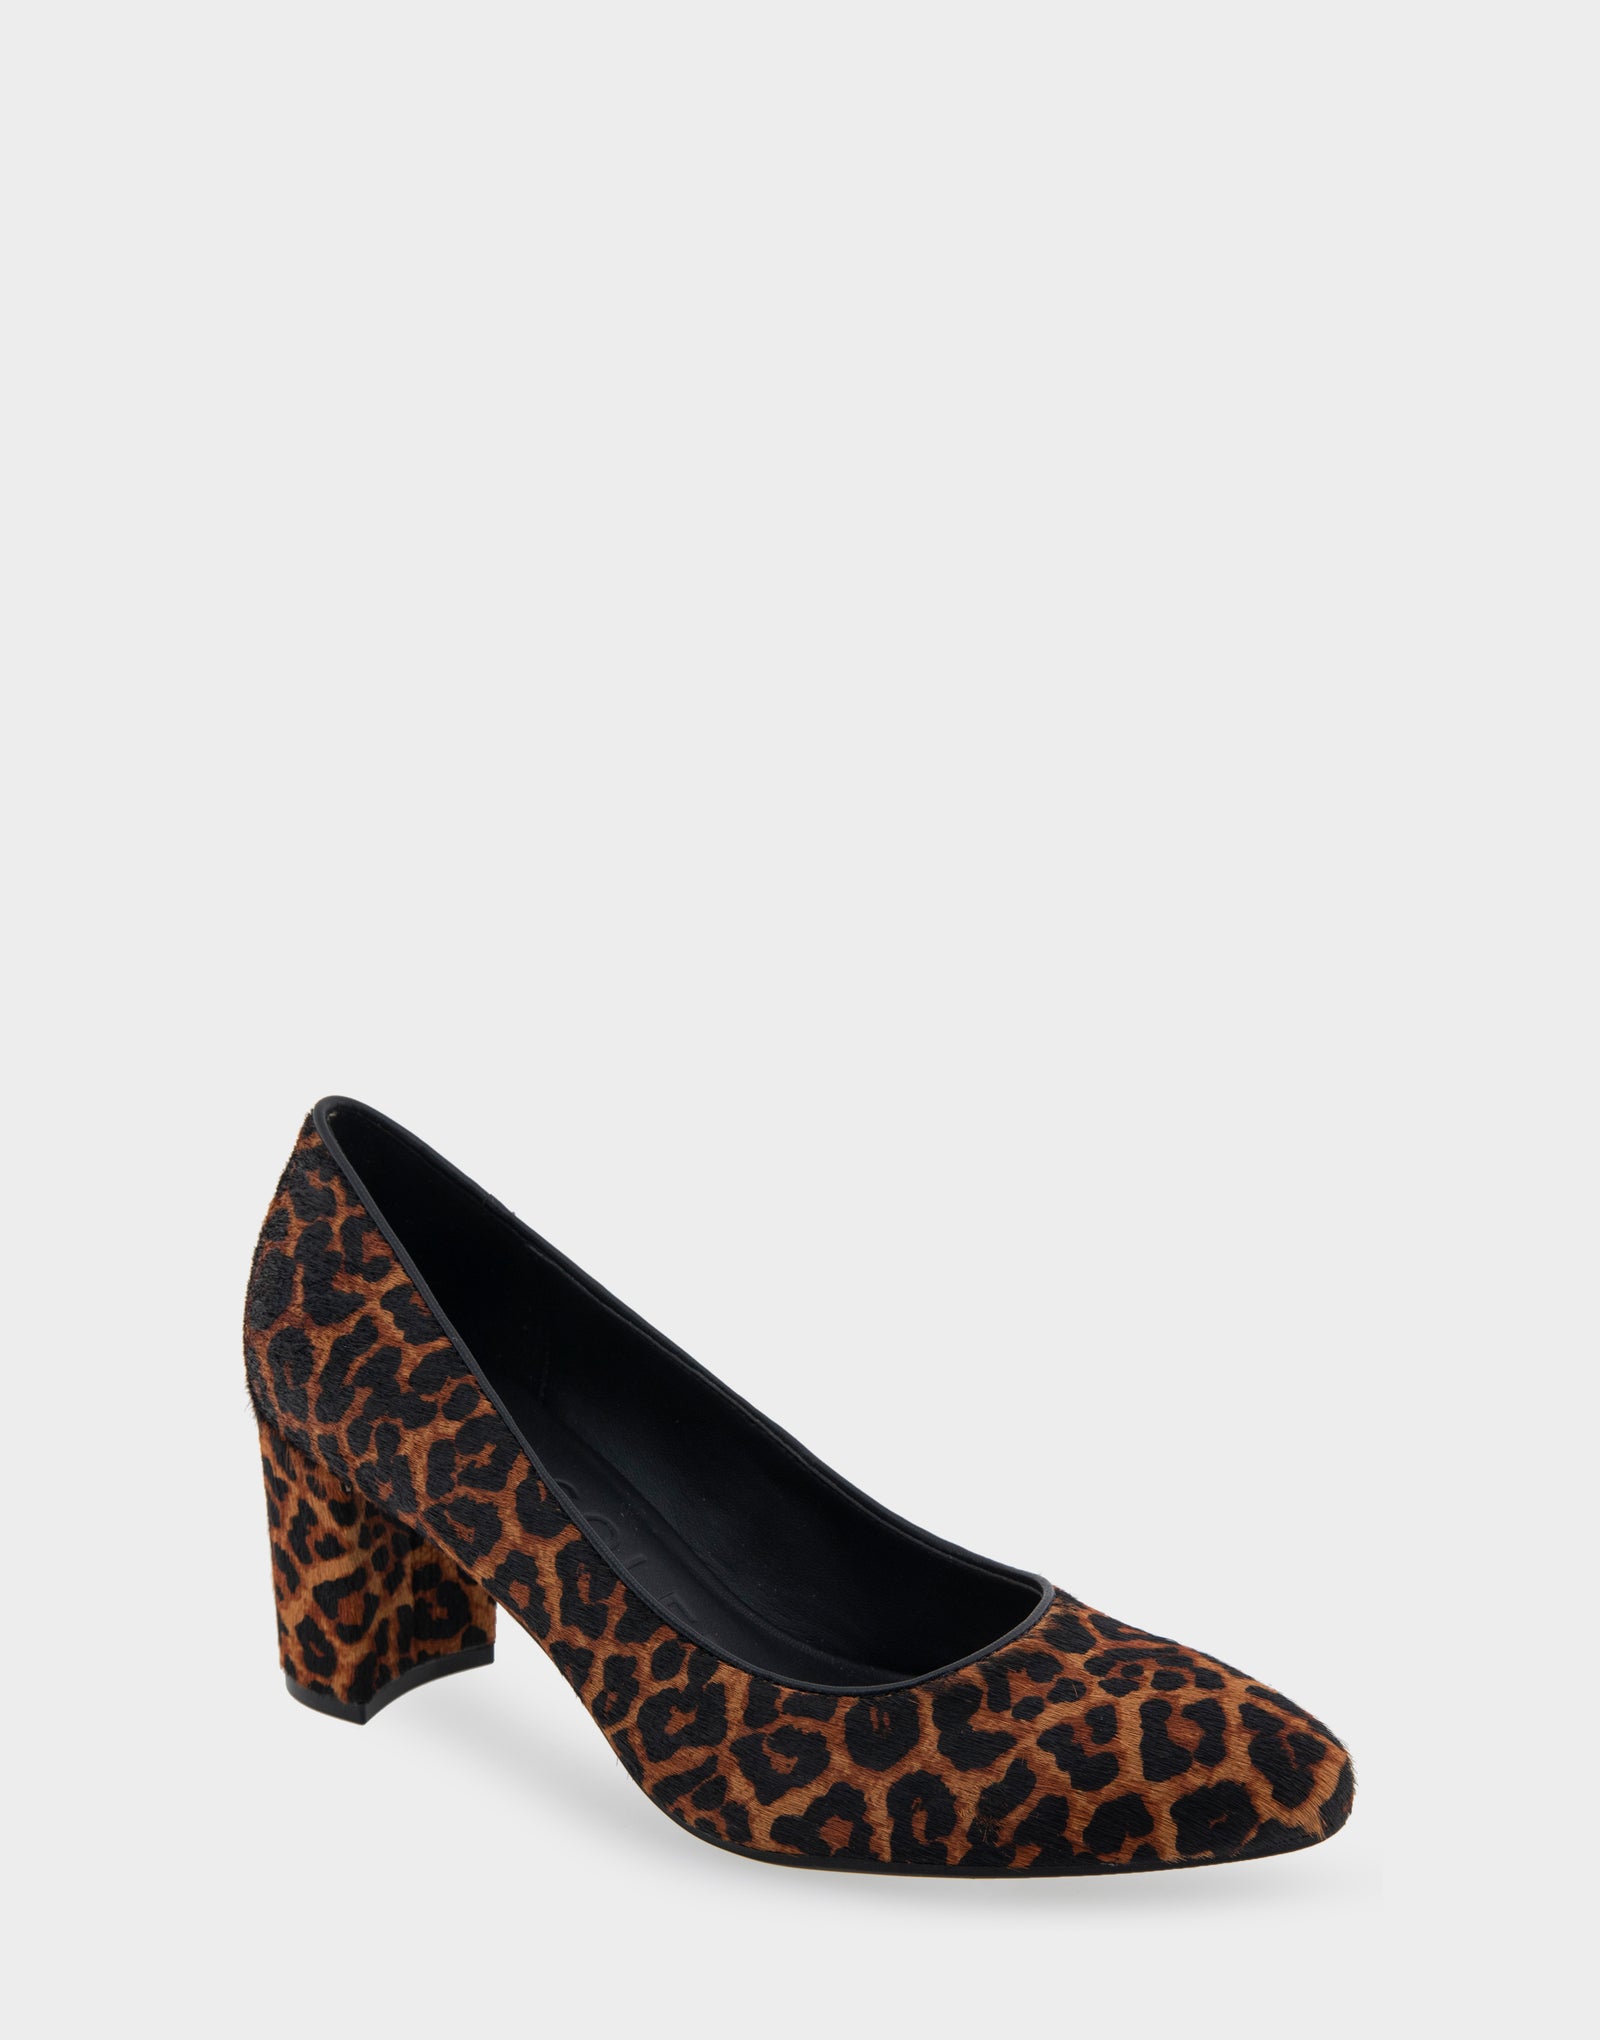 Leopard Print Heels That Will Keep You Stylish and Comfortable